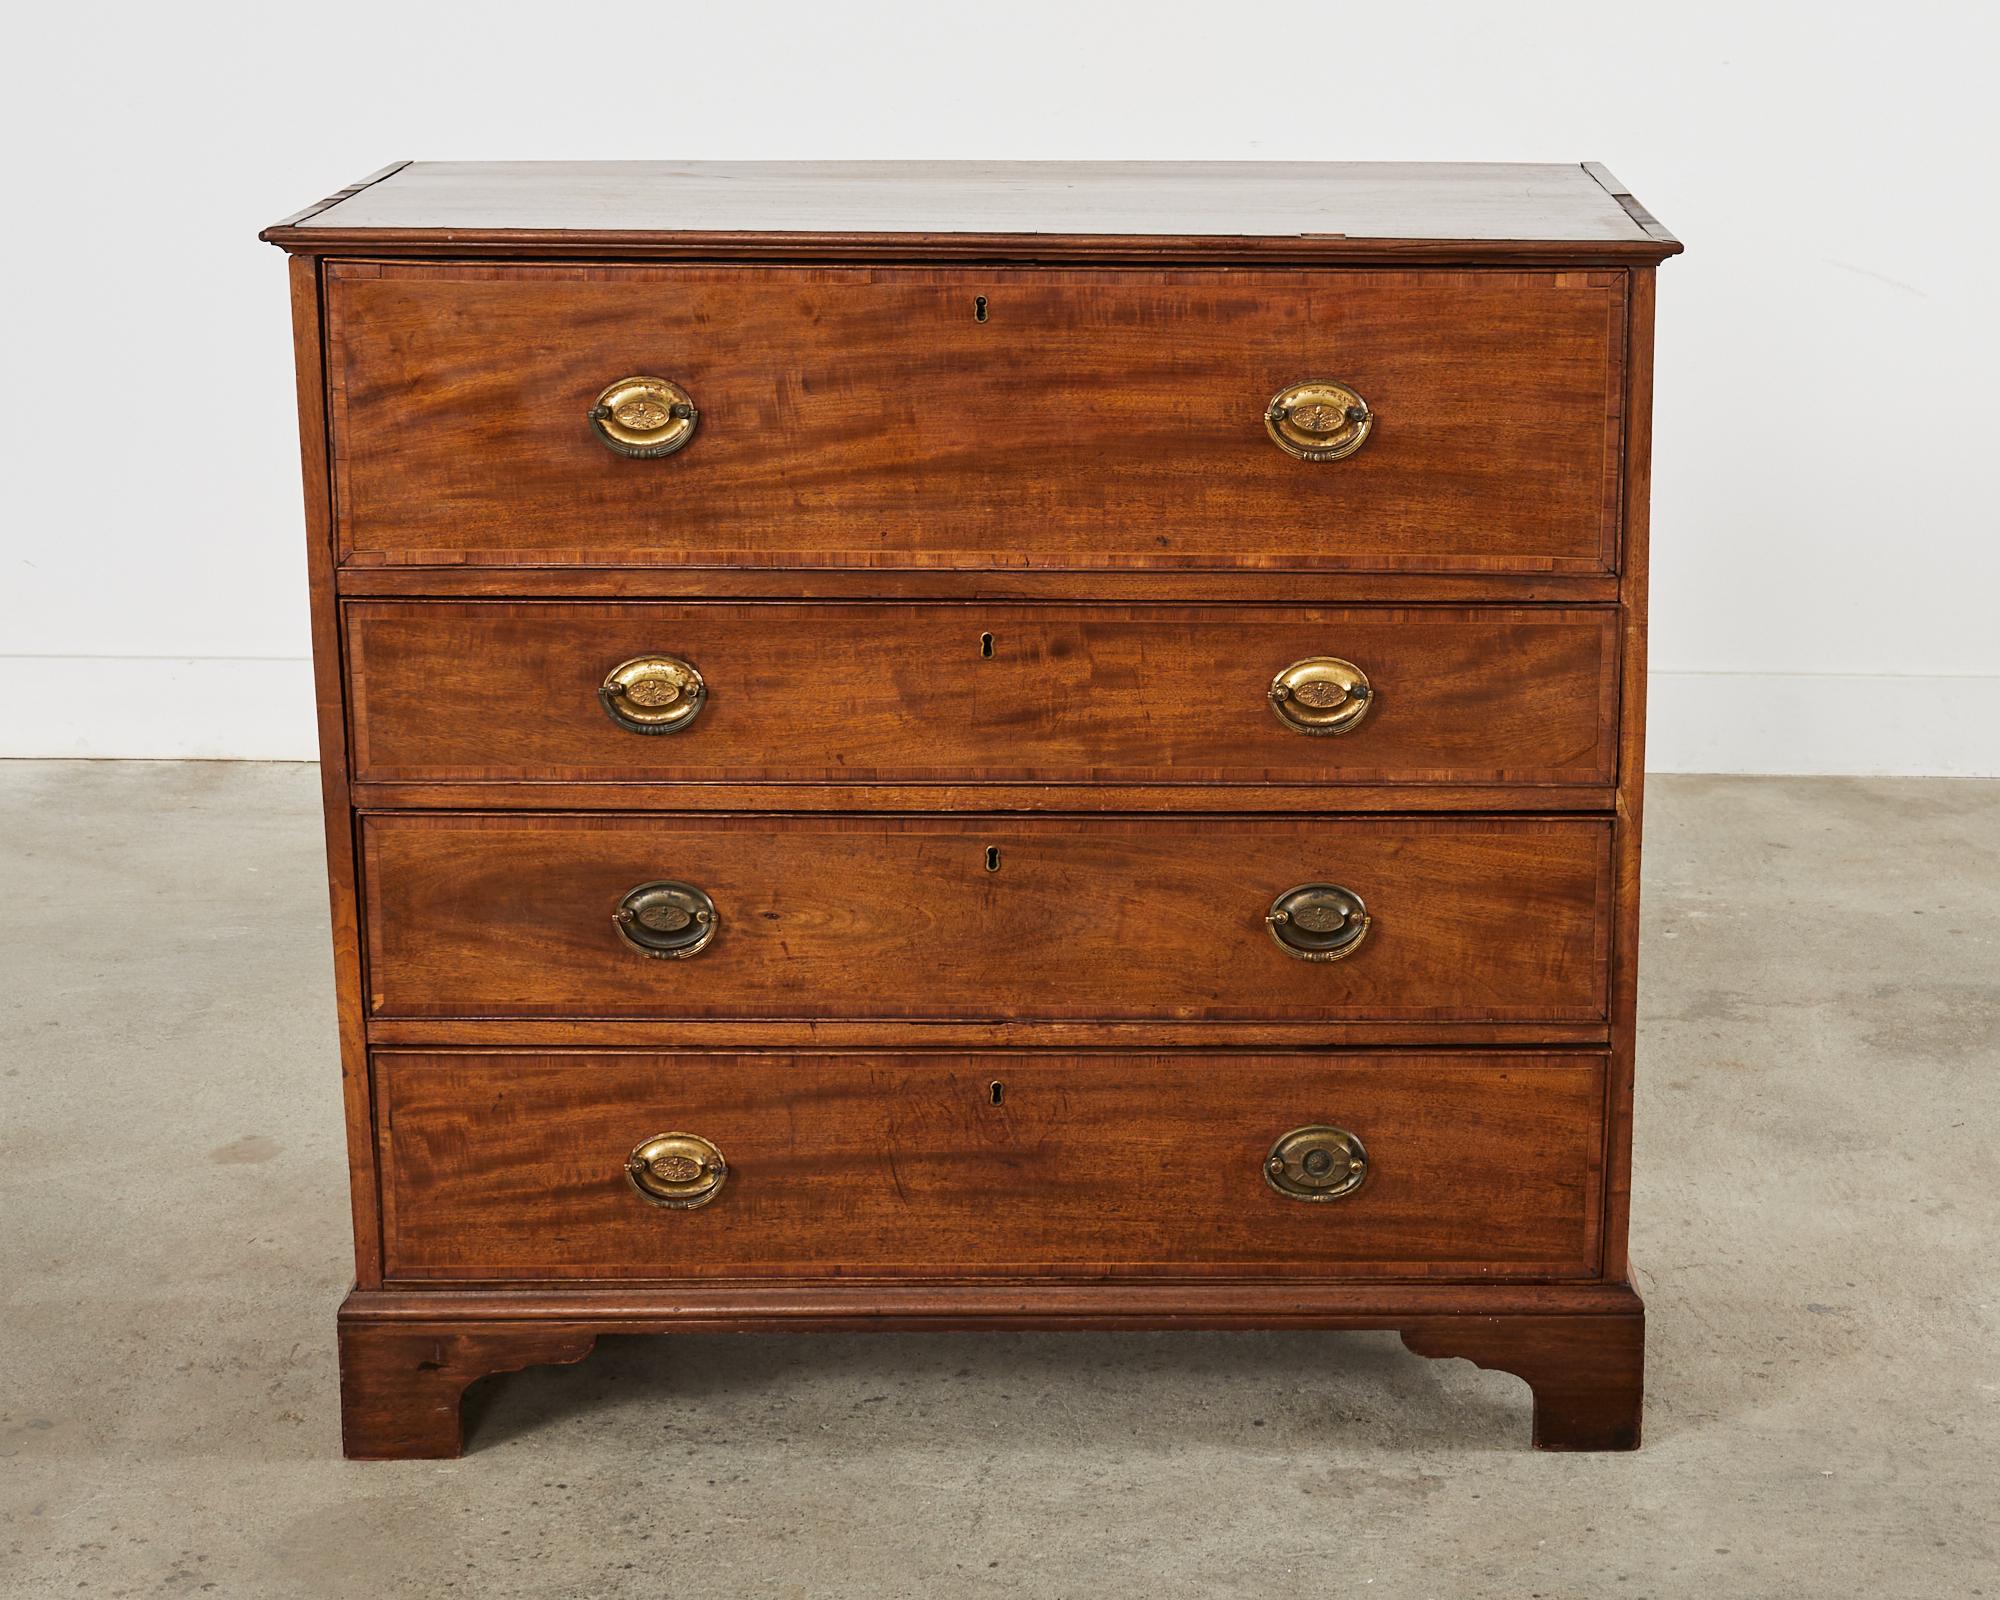 Grand early 19th century English Georgian butler's desk or chest of drawers with secretaire. Crafted from radiant mahogany with delicate thread inlay and veneer. The commode has a large hinged panel with push button mechanisms to drop the front